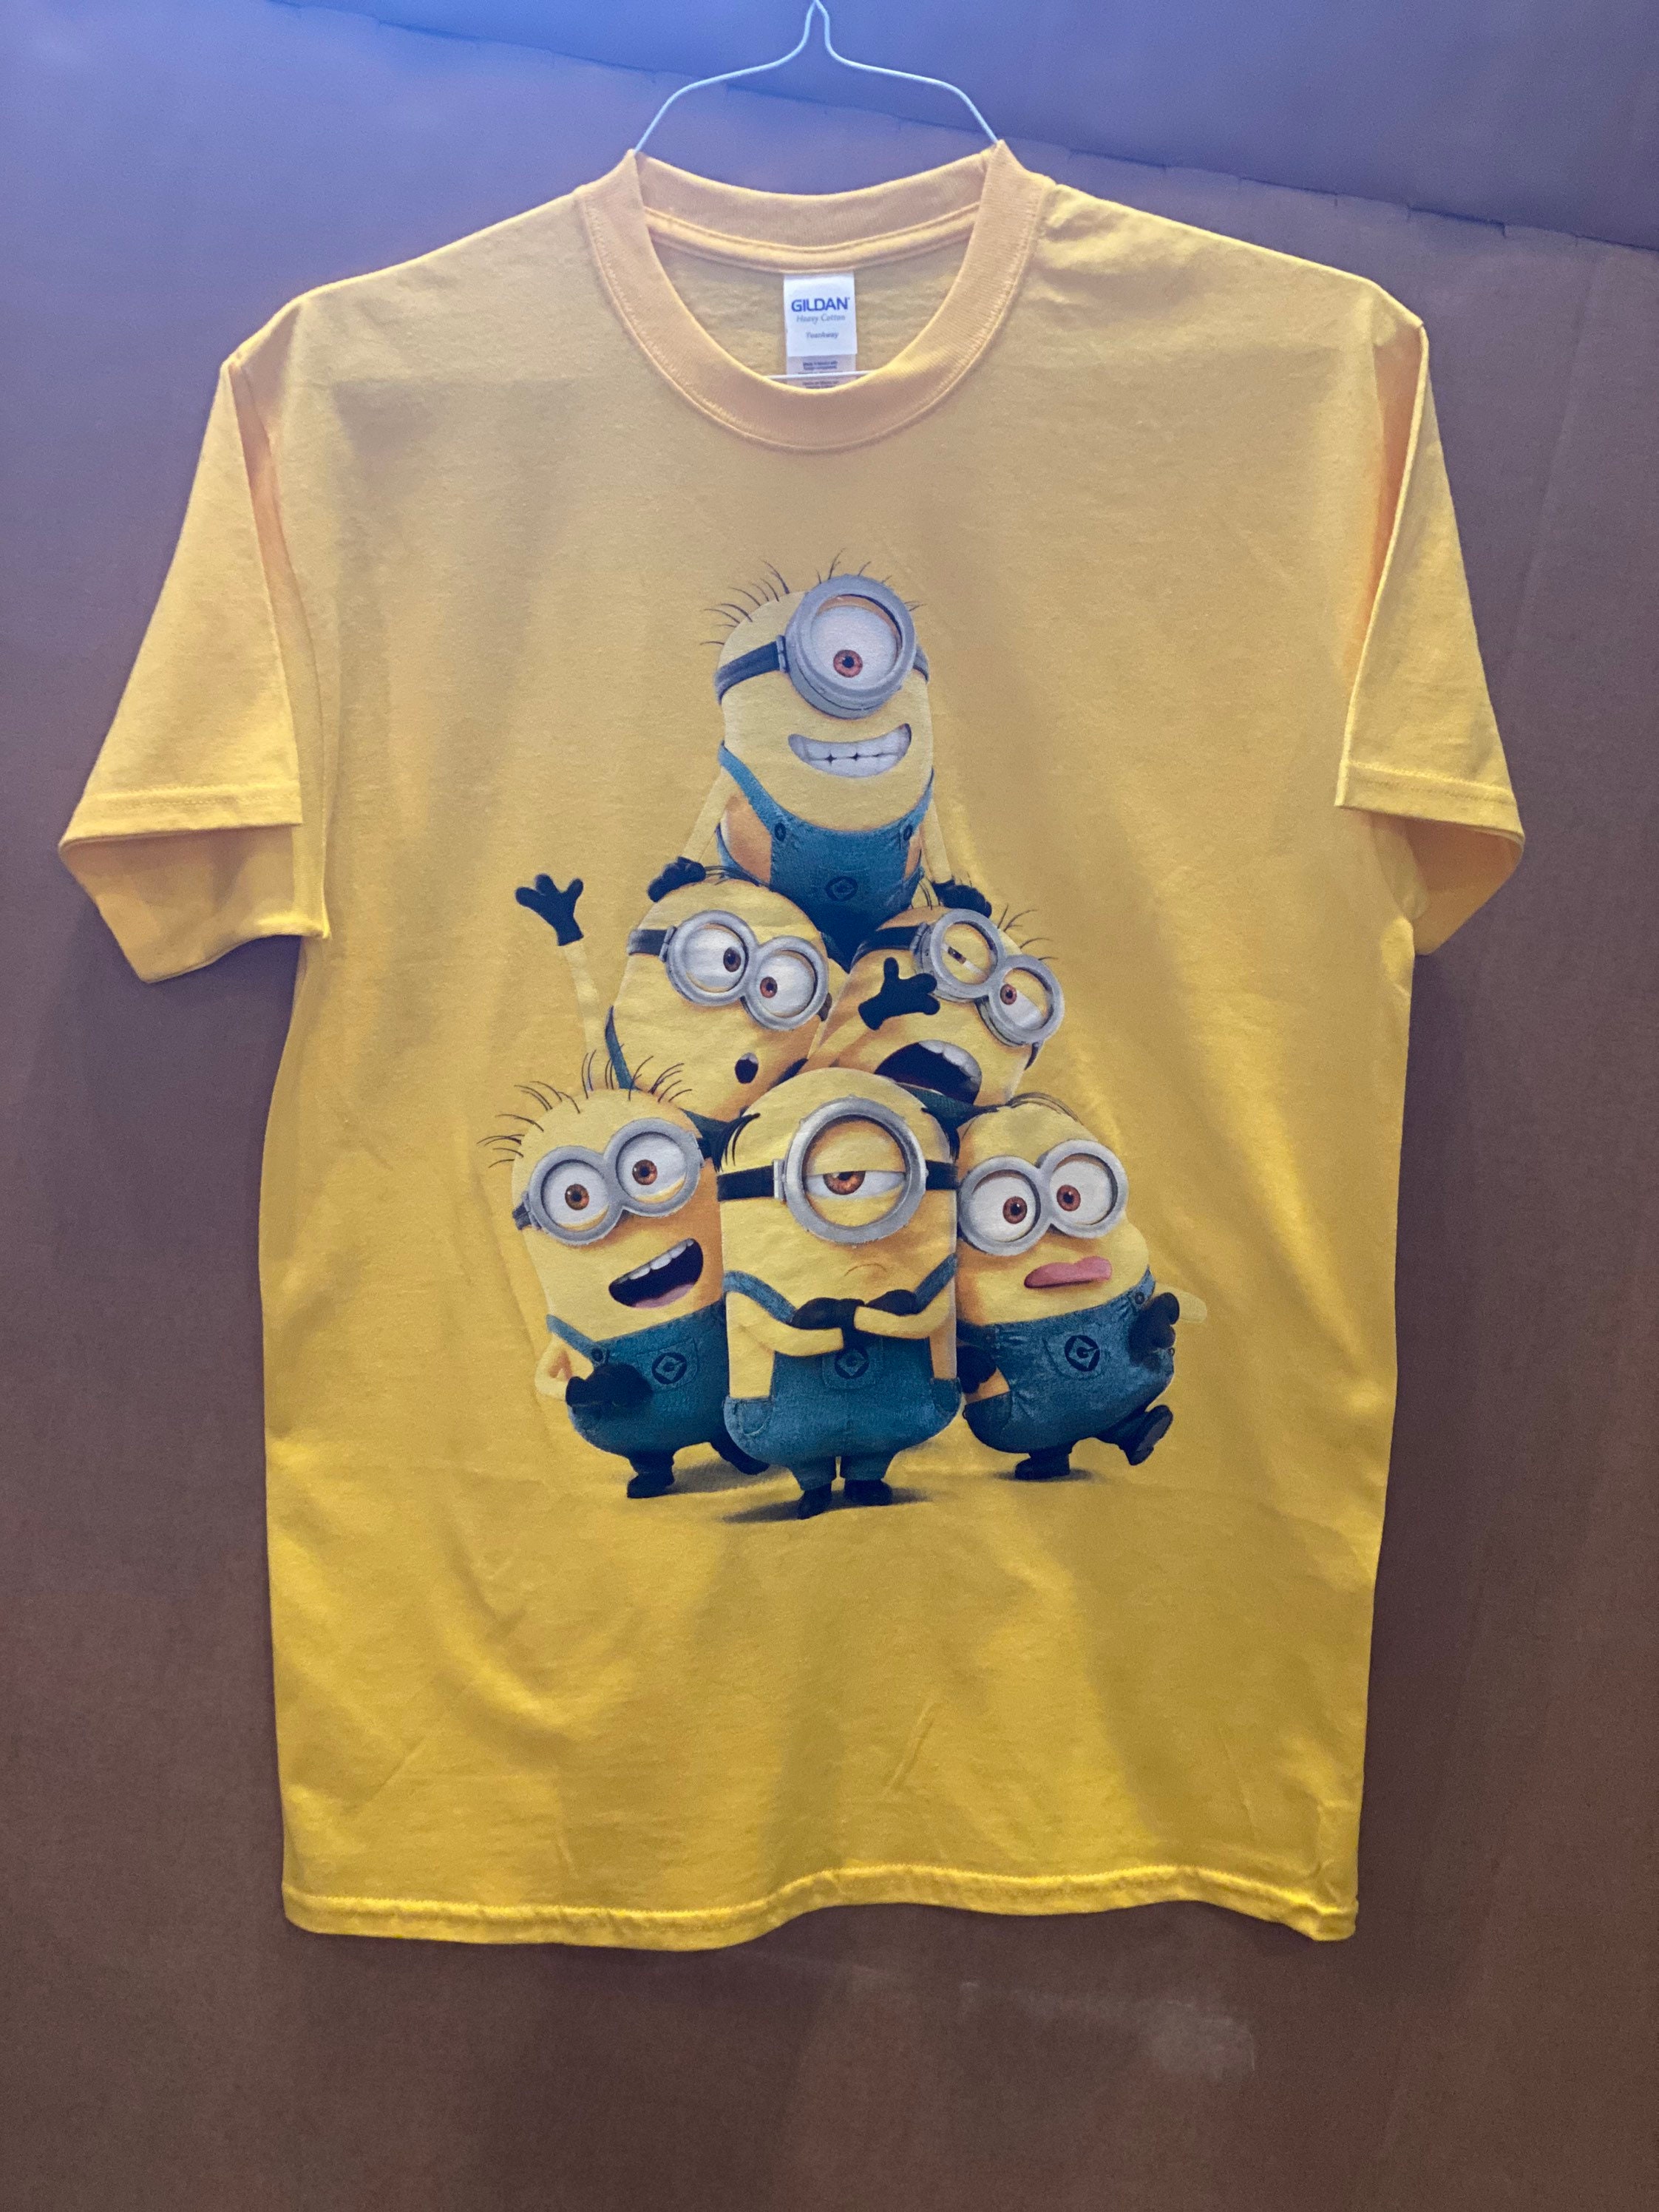 NEW Adult T Shirts Minions the Dispicables Glow in the Dark - Etsy